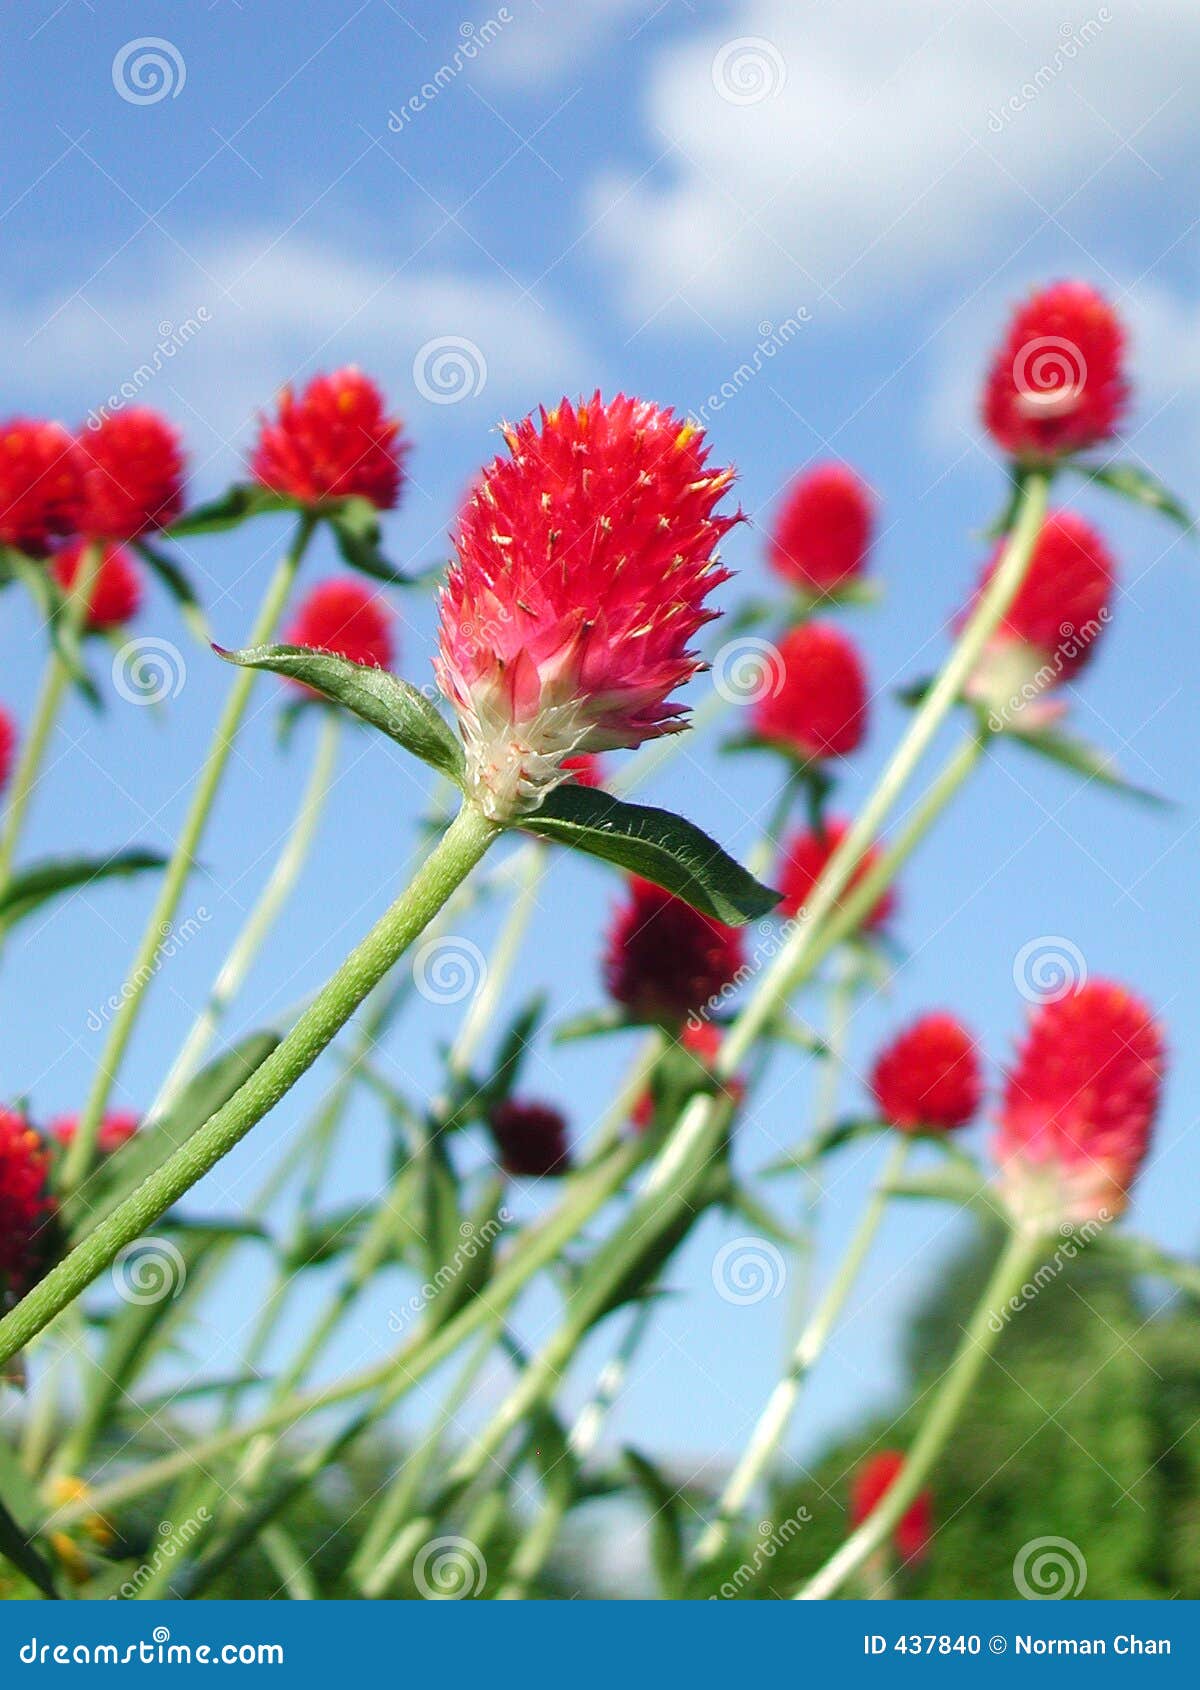 red flower with full of vitality